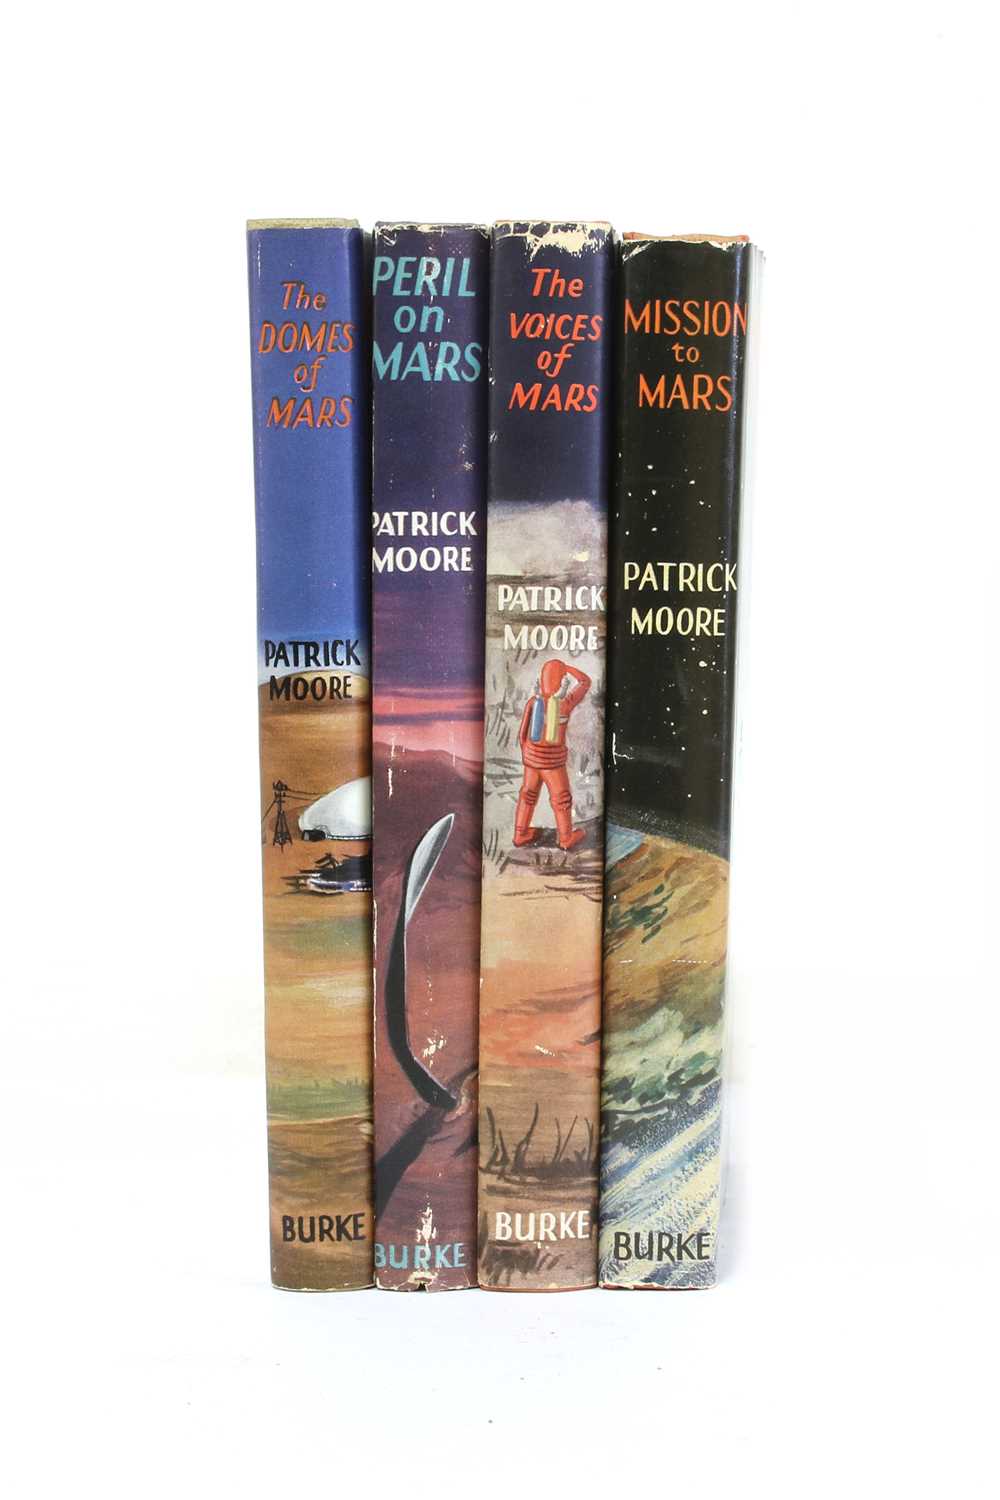 Lot 4 - Patrick MOORE (3 Science Fiction first editions with Dust jacket, VG+